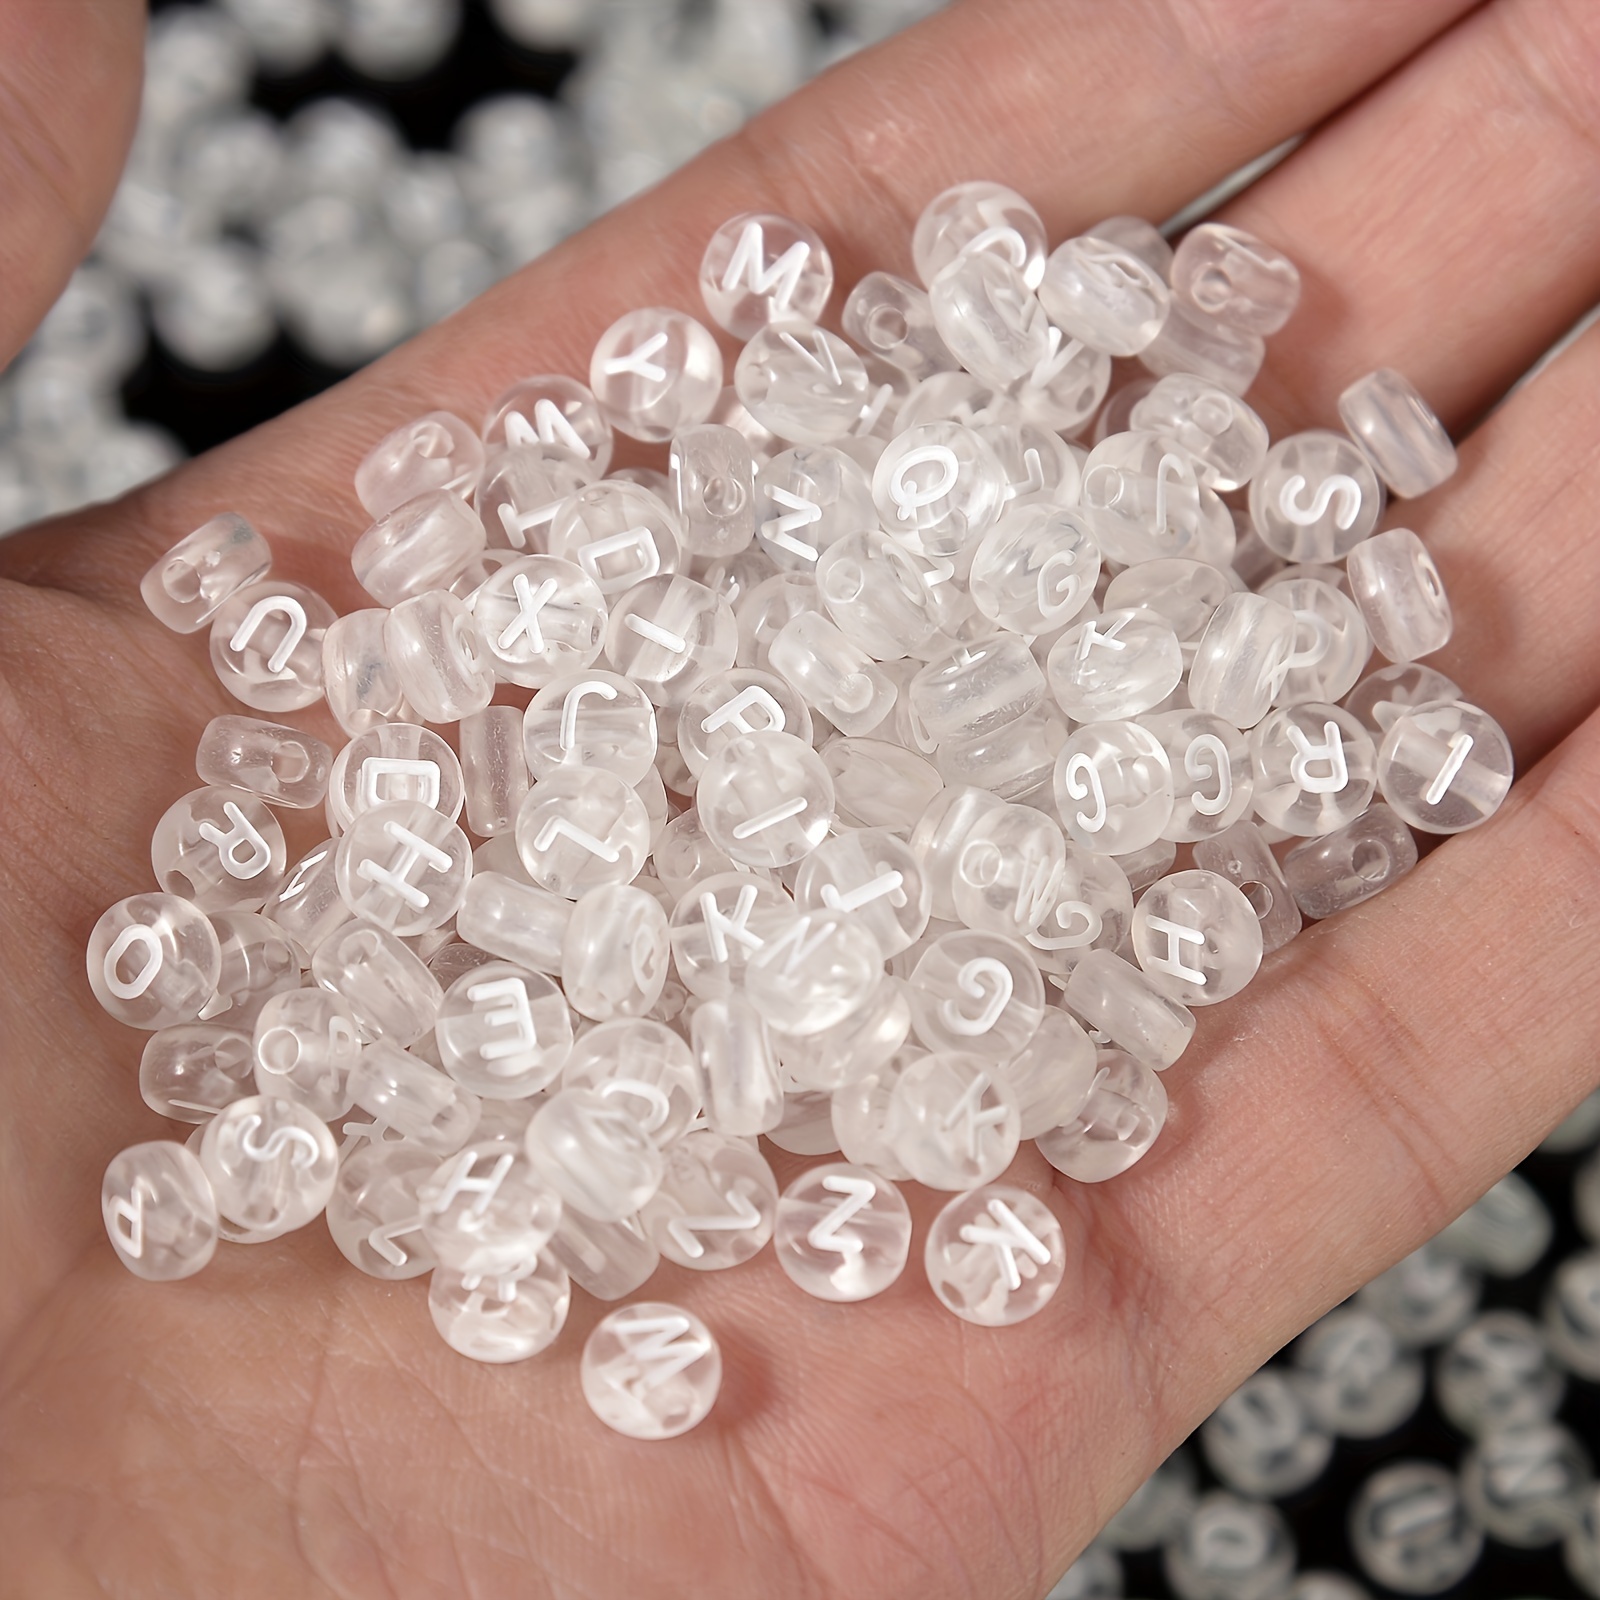 

500pcs Acrylic Transparent White Alphabet Beads For Jewelry Necklace Making And Diy Craft Projects